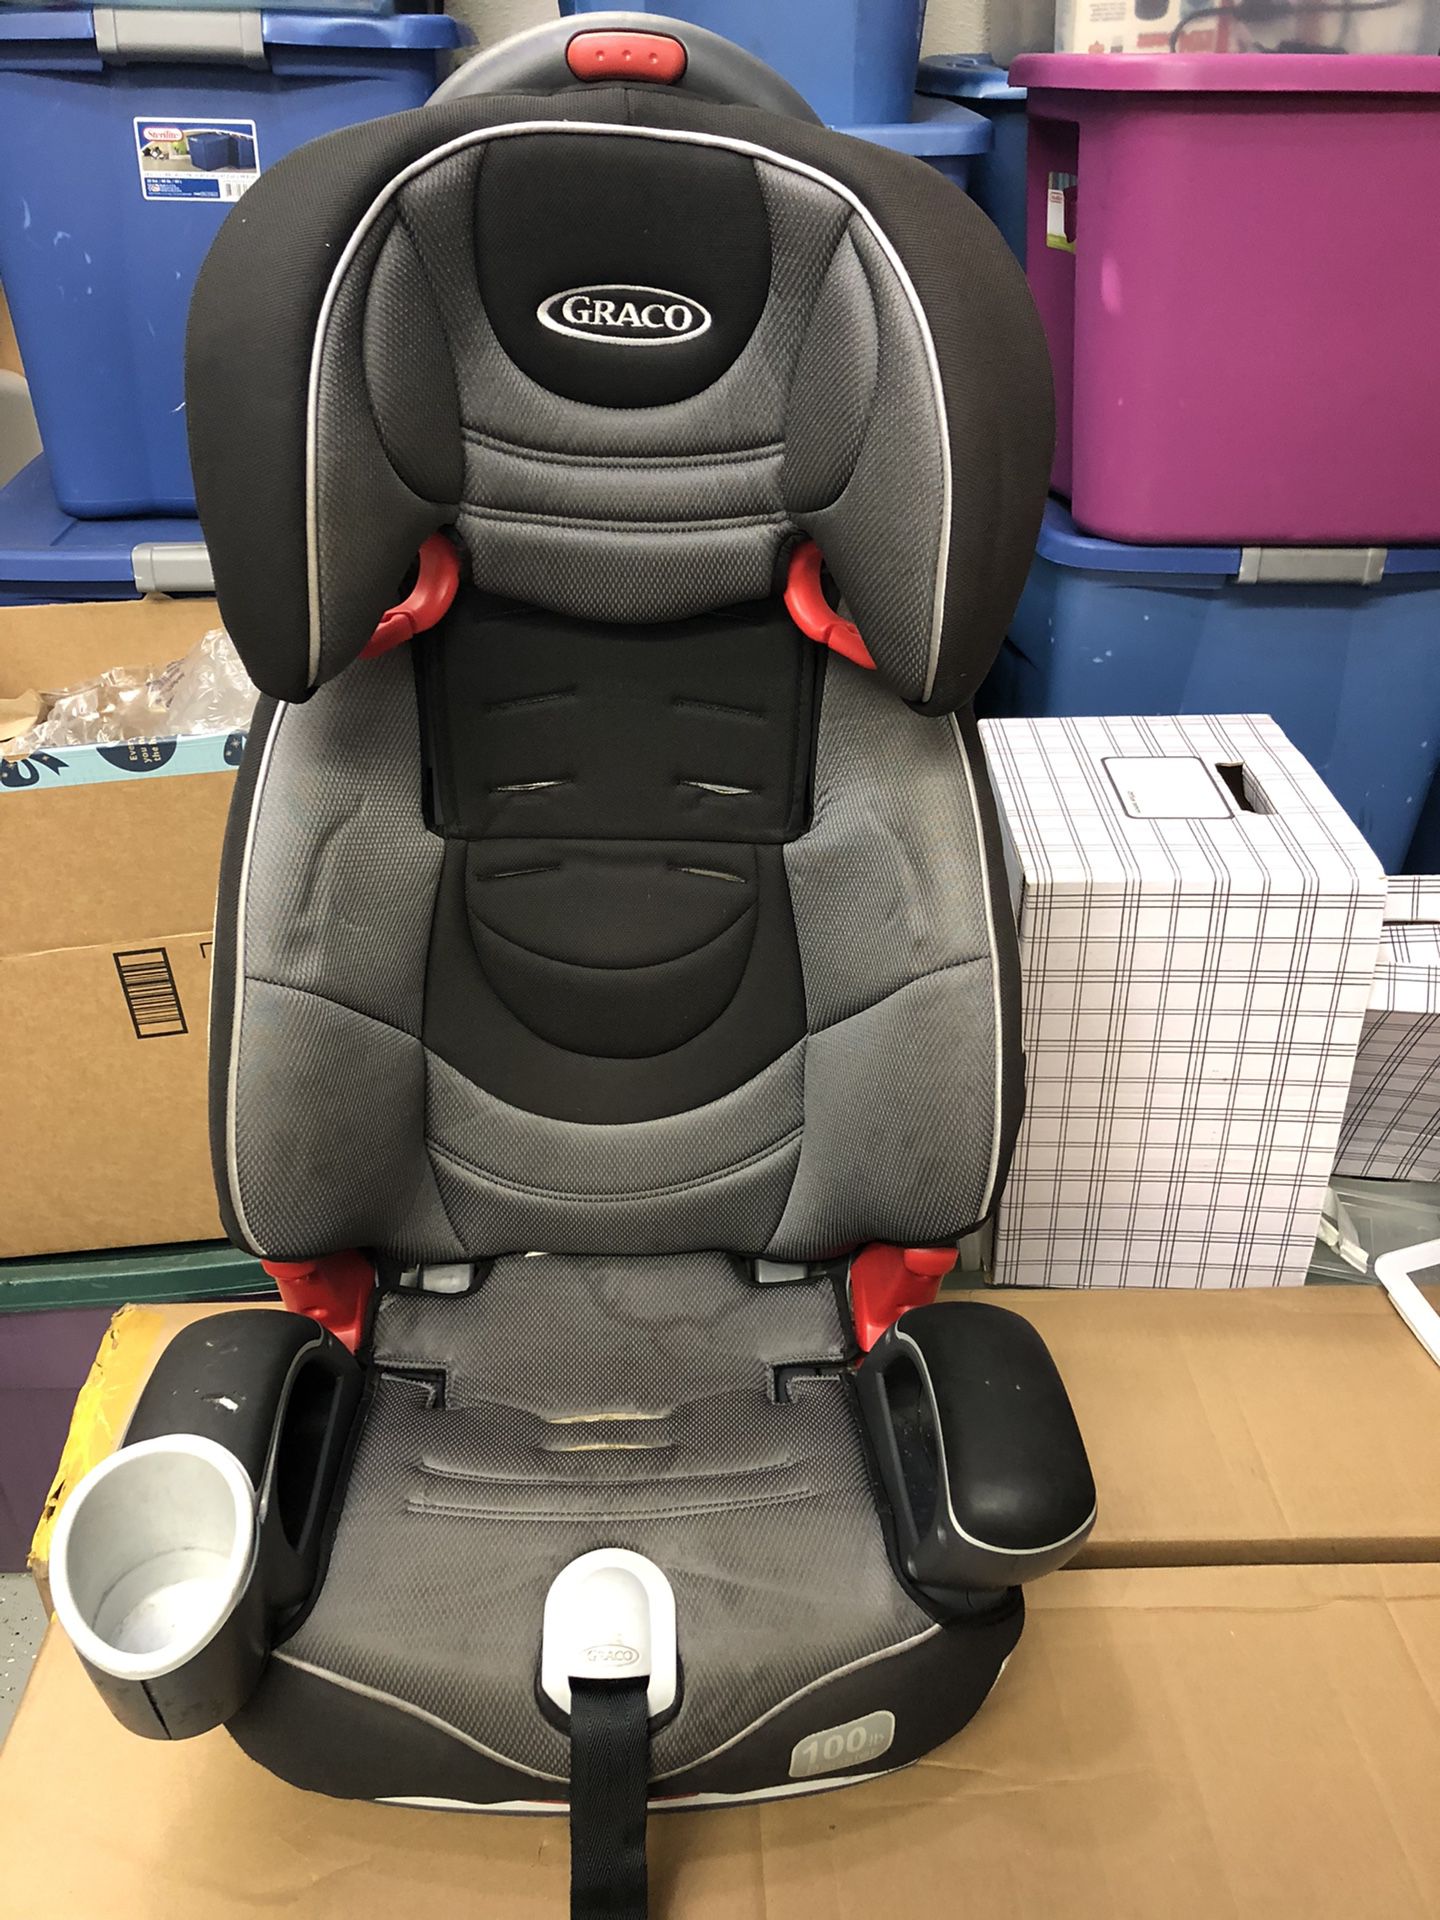 Graco car seat booster seat